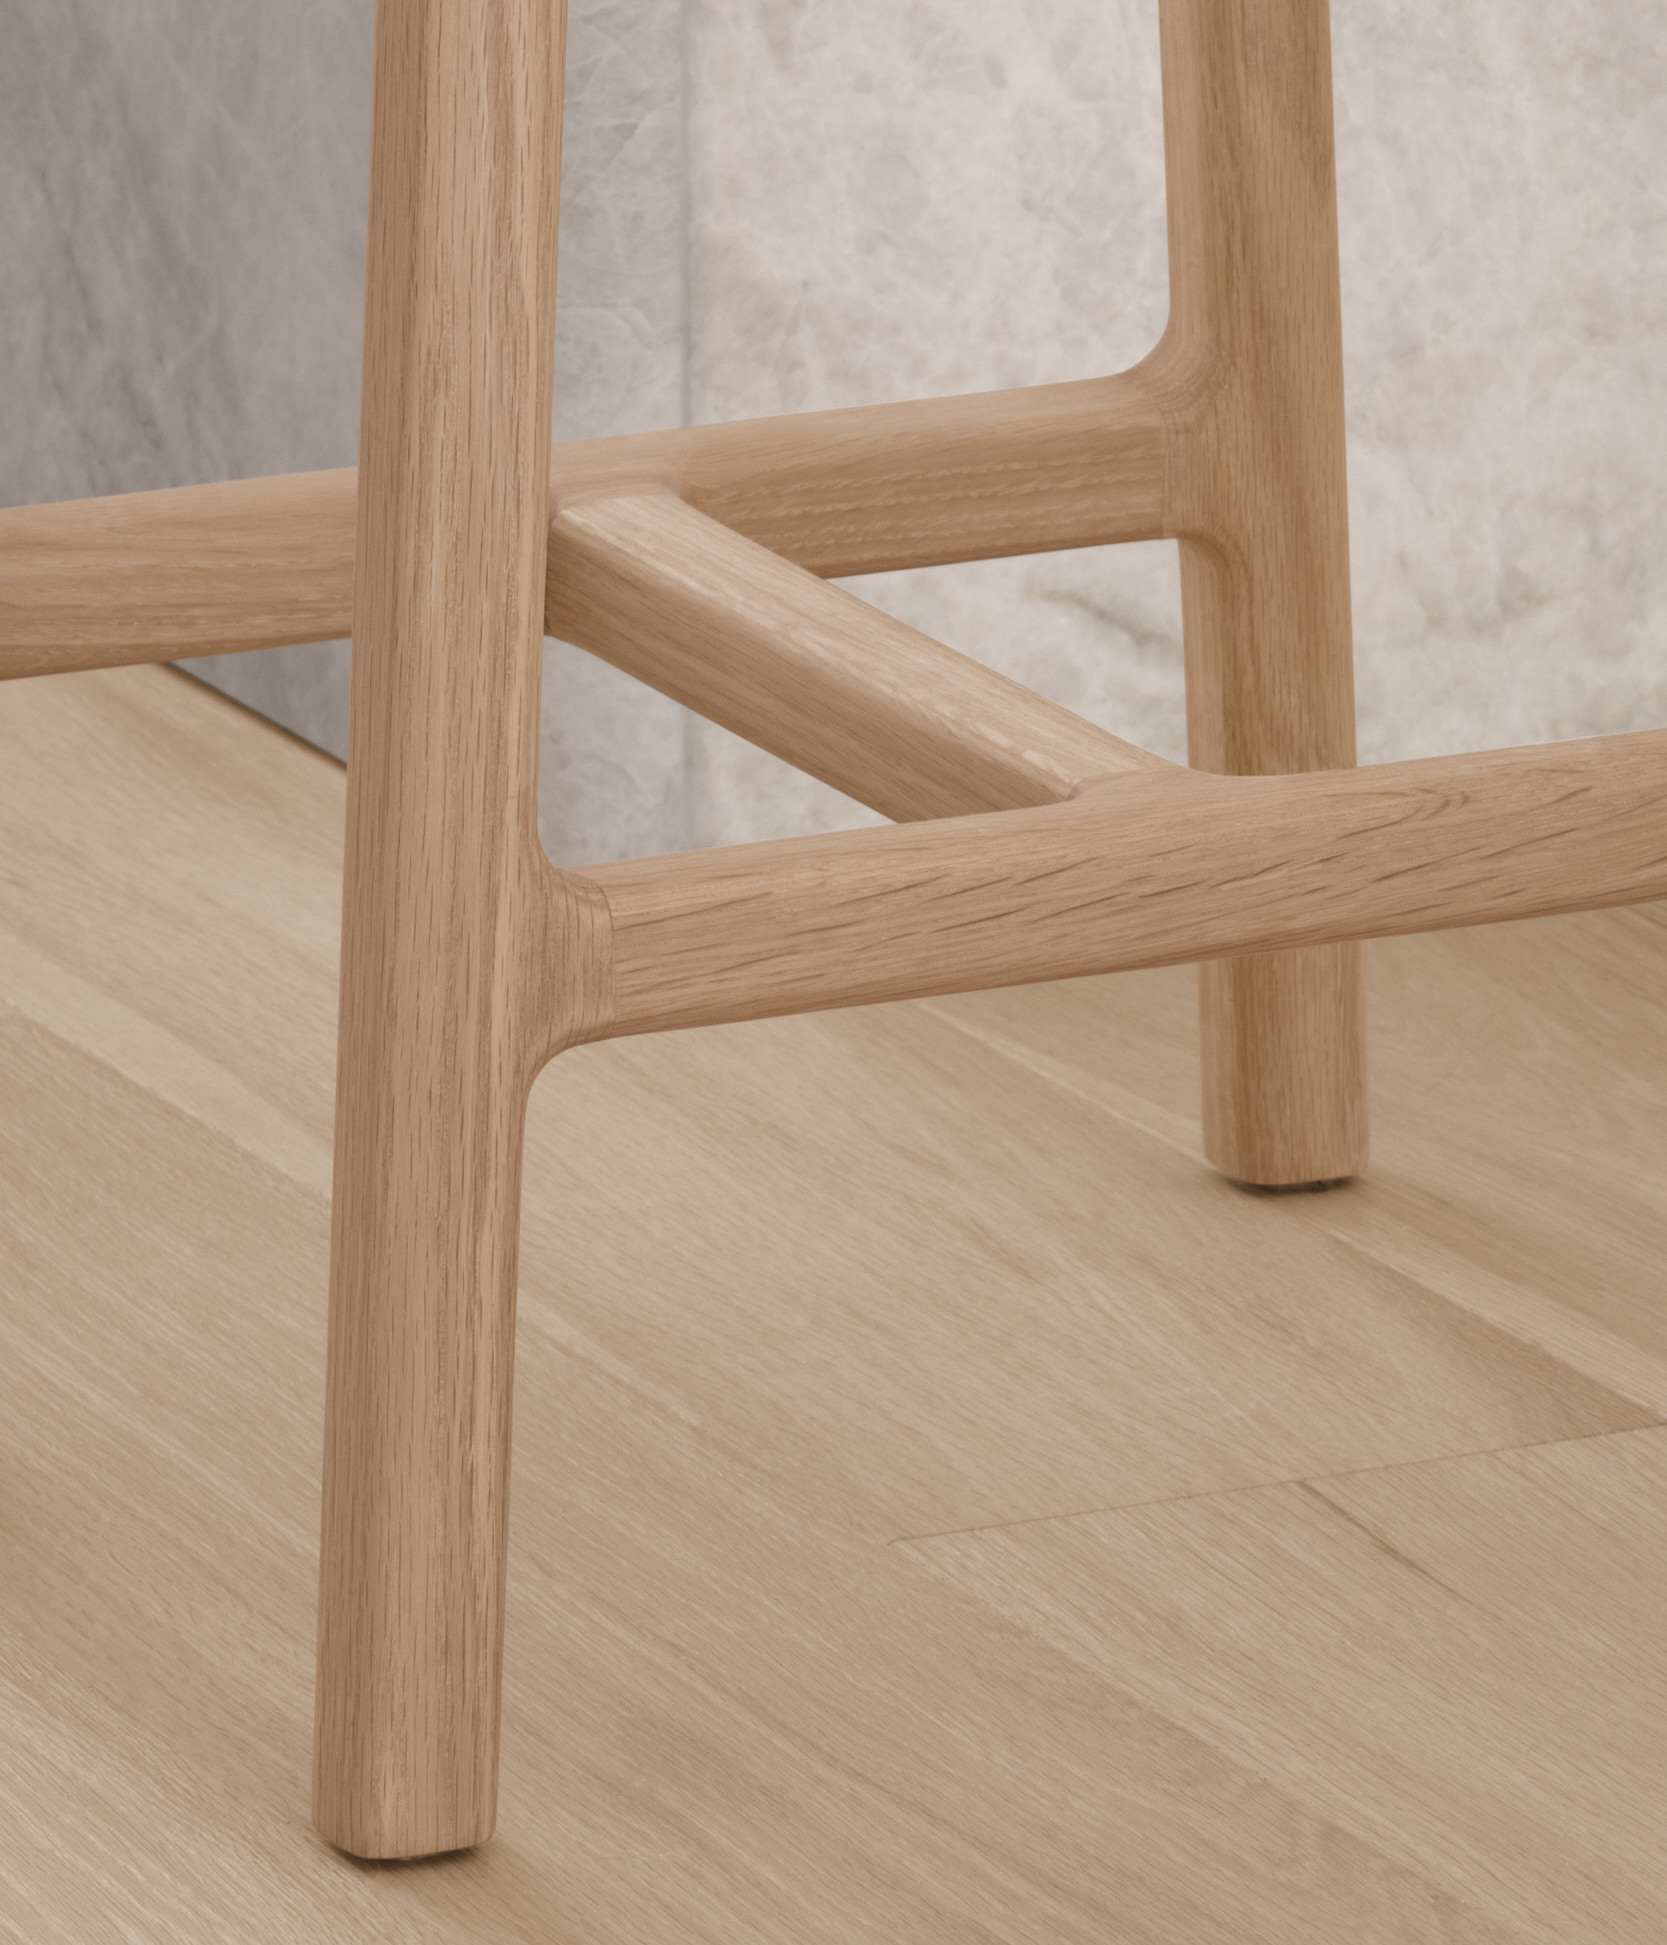 detail of Olmsted stool joinery